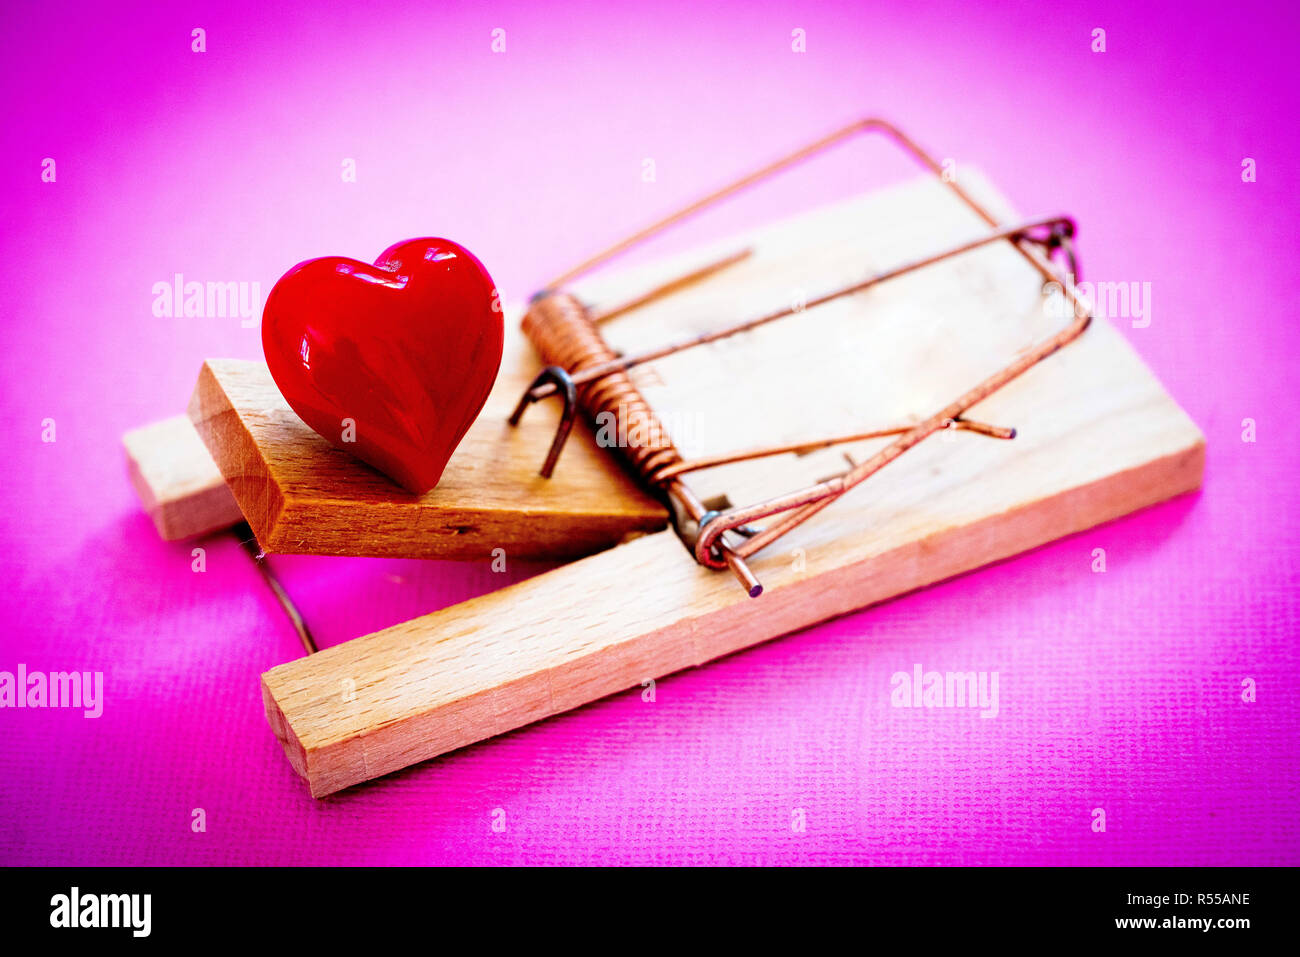 Heart in a mousetrap, Conceptual image on cardiovascular diseases. Stock Photo